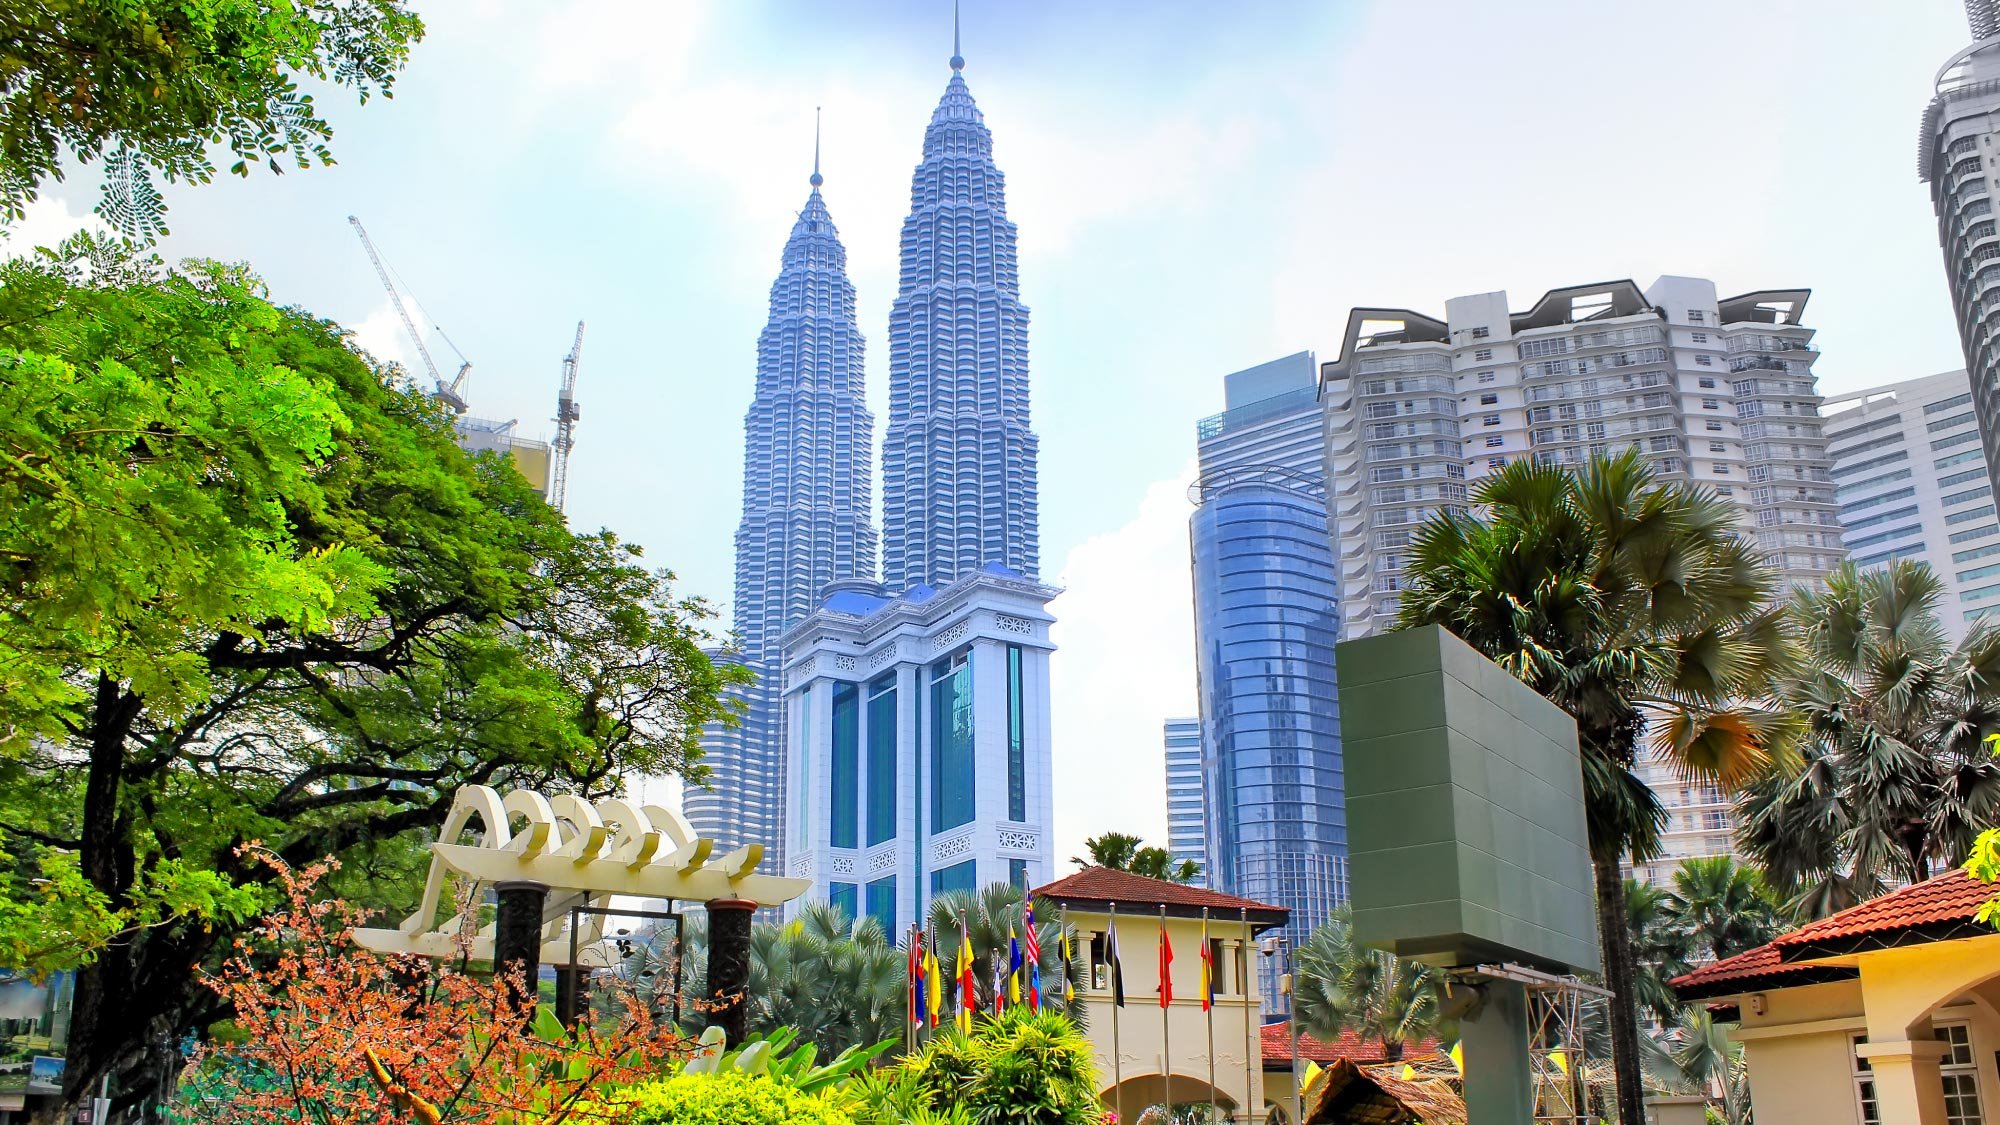 Explore Kuala Lumpur, Malaysia, a highlight of our journey to Australia and 21 other countries. Discover the iconic Petronas Twin Towers, historic landmarks, and vibrant culture of this dynamic city.